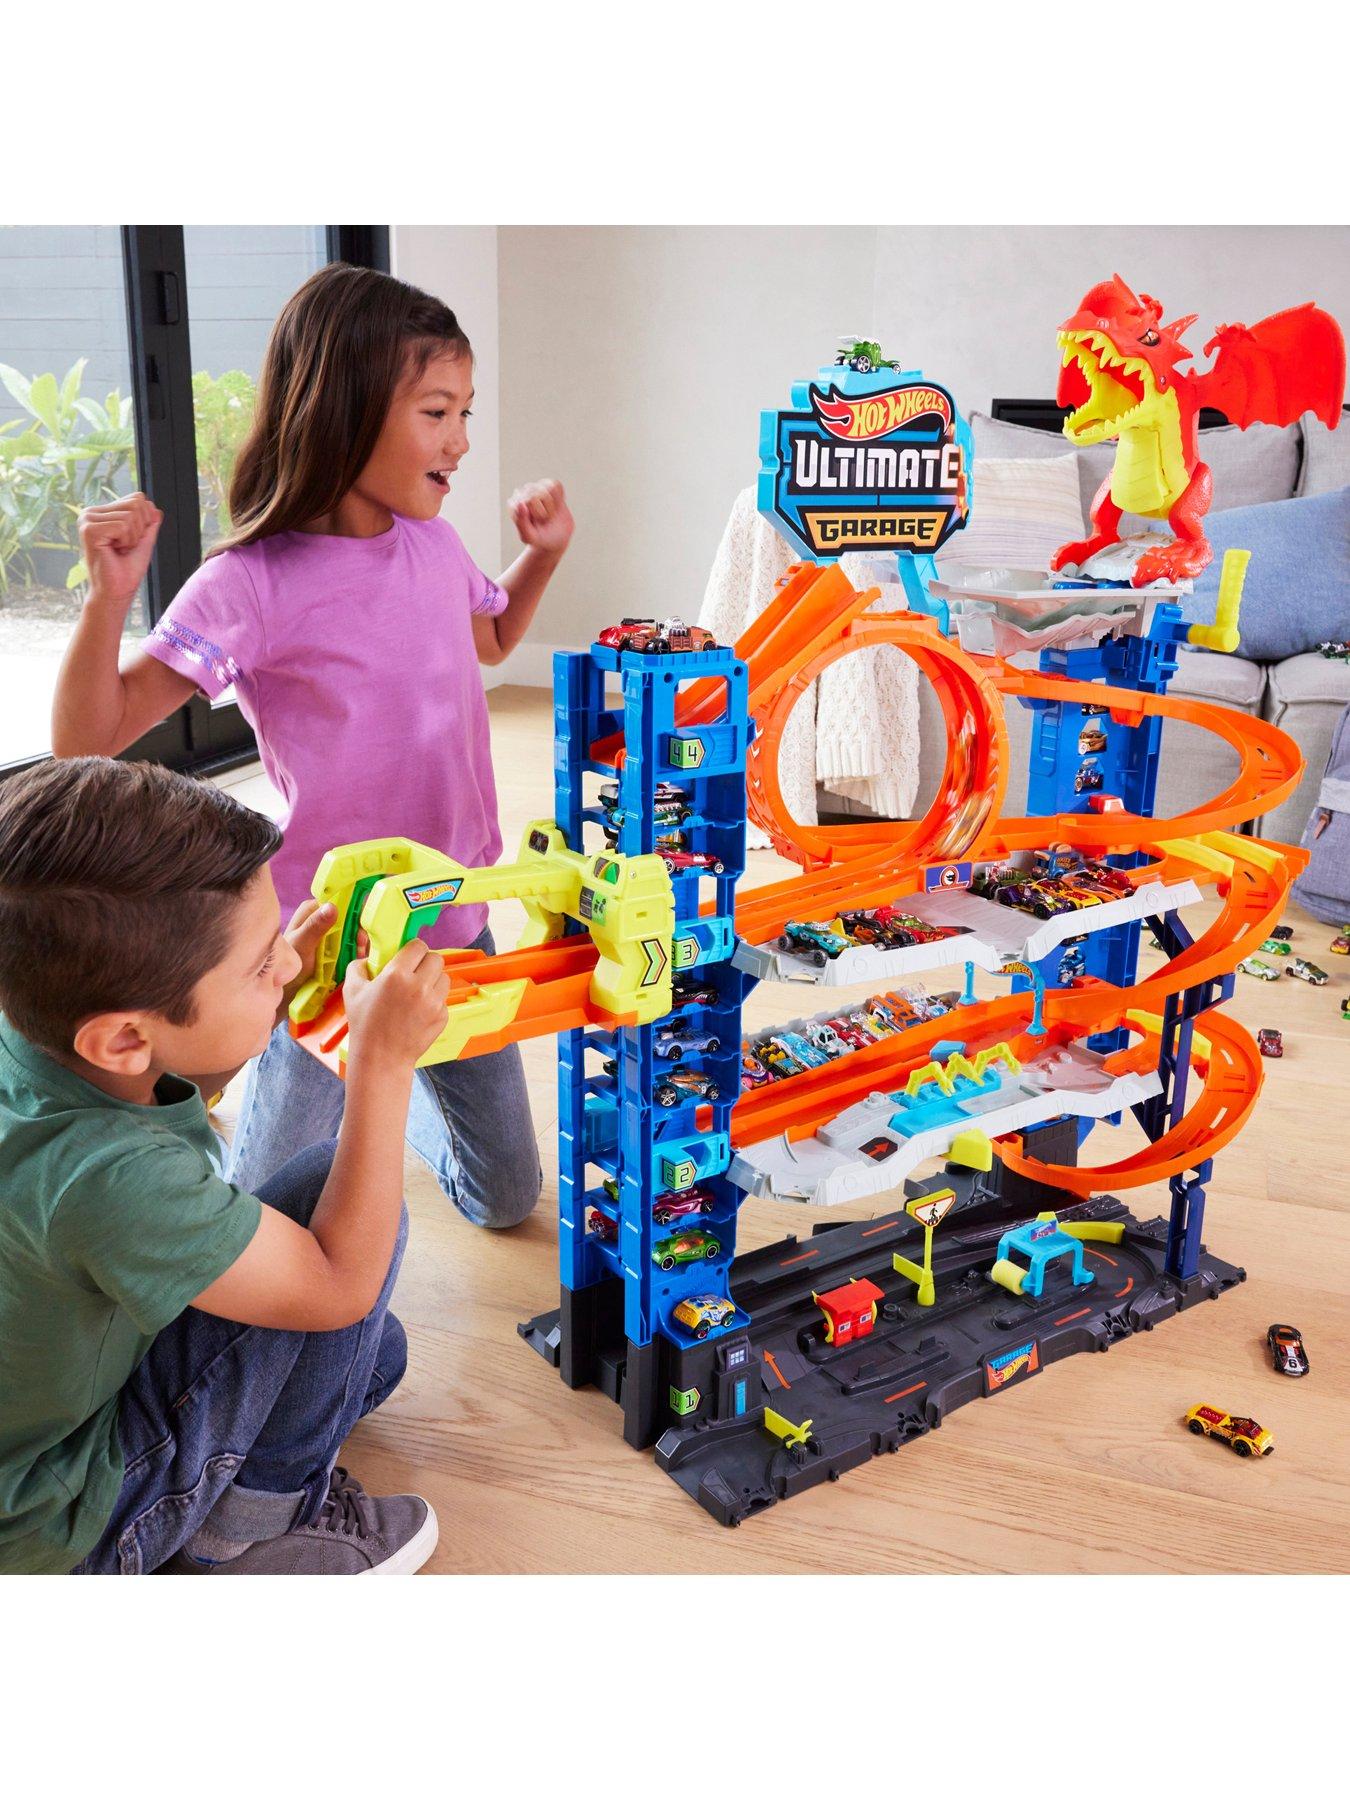 Hot Wheels Ultimate Garage Playset with Attack Shark Spiral Ramp